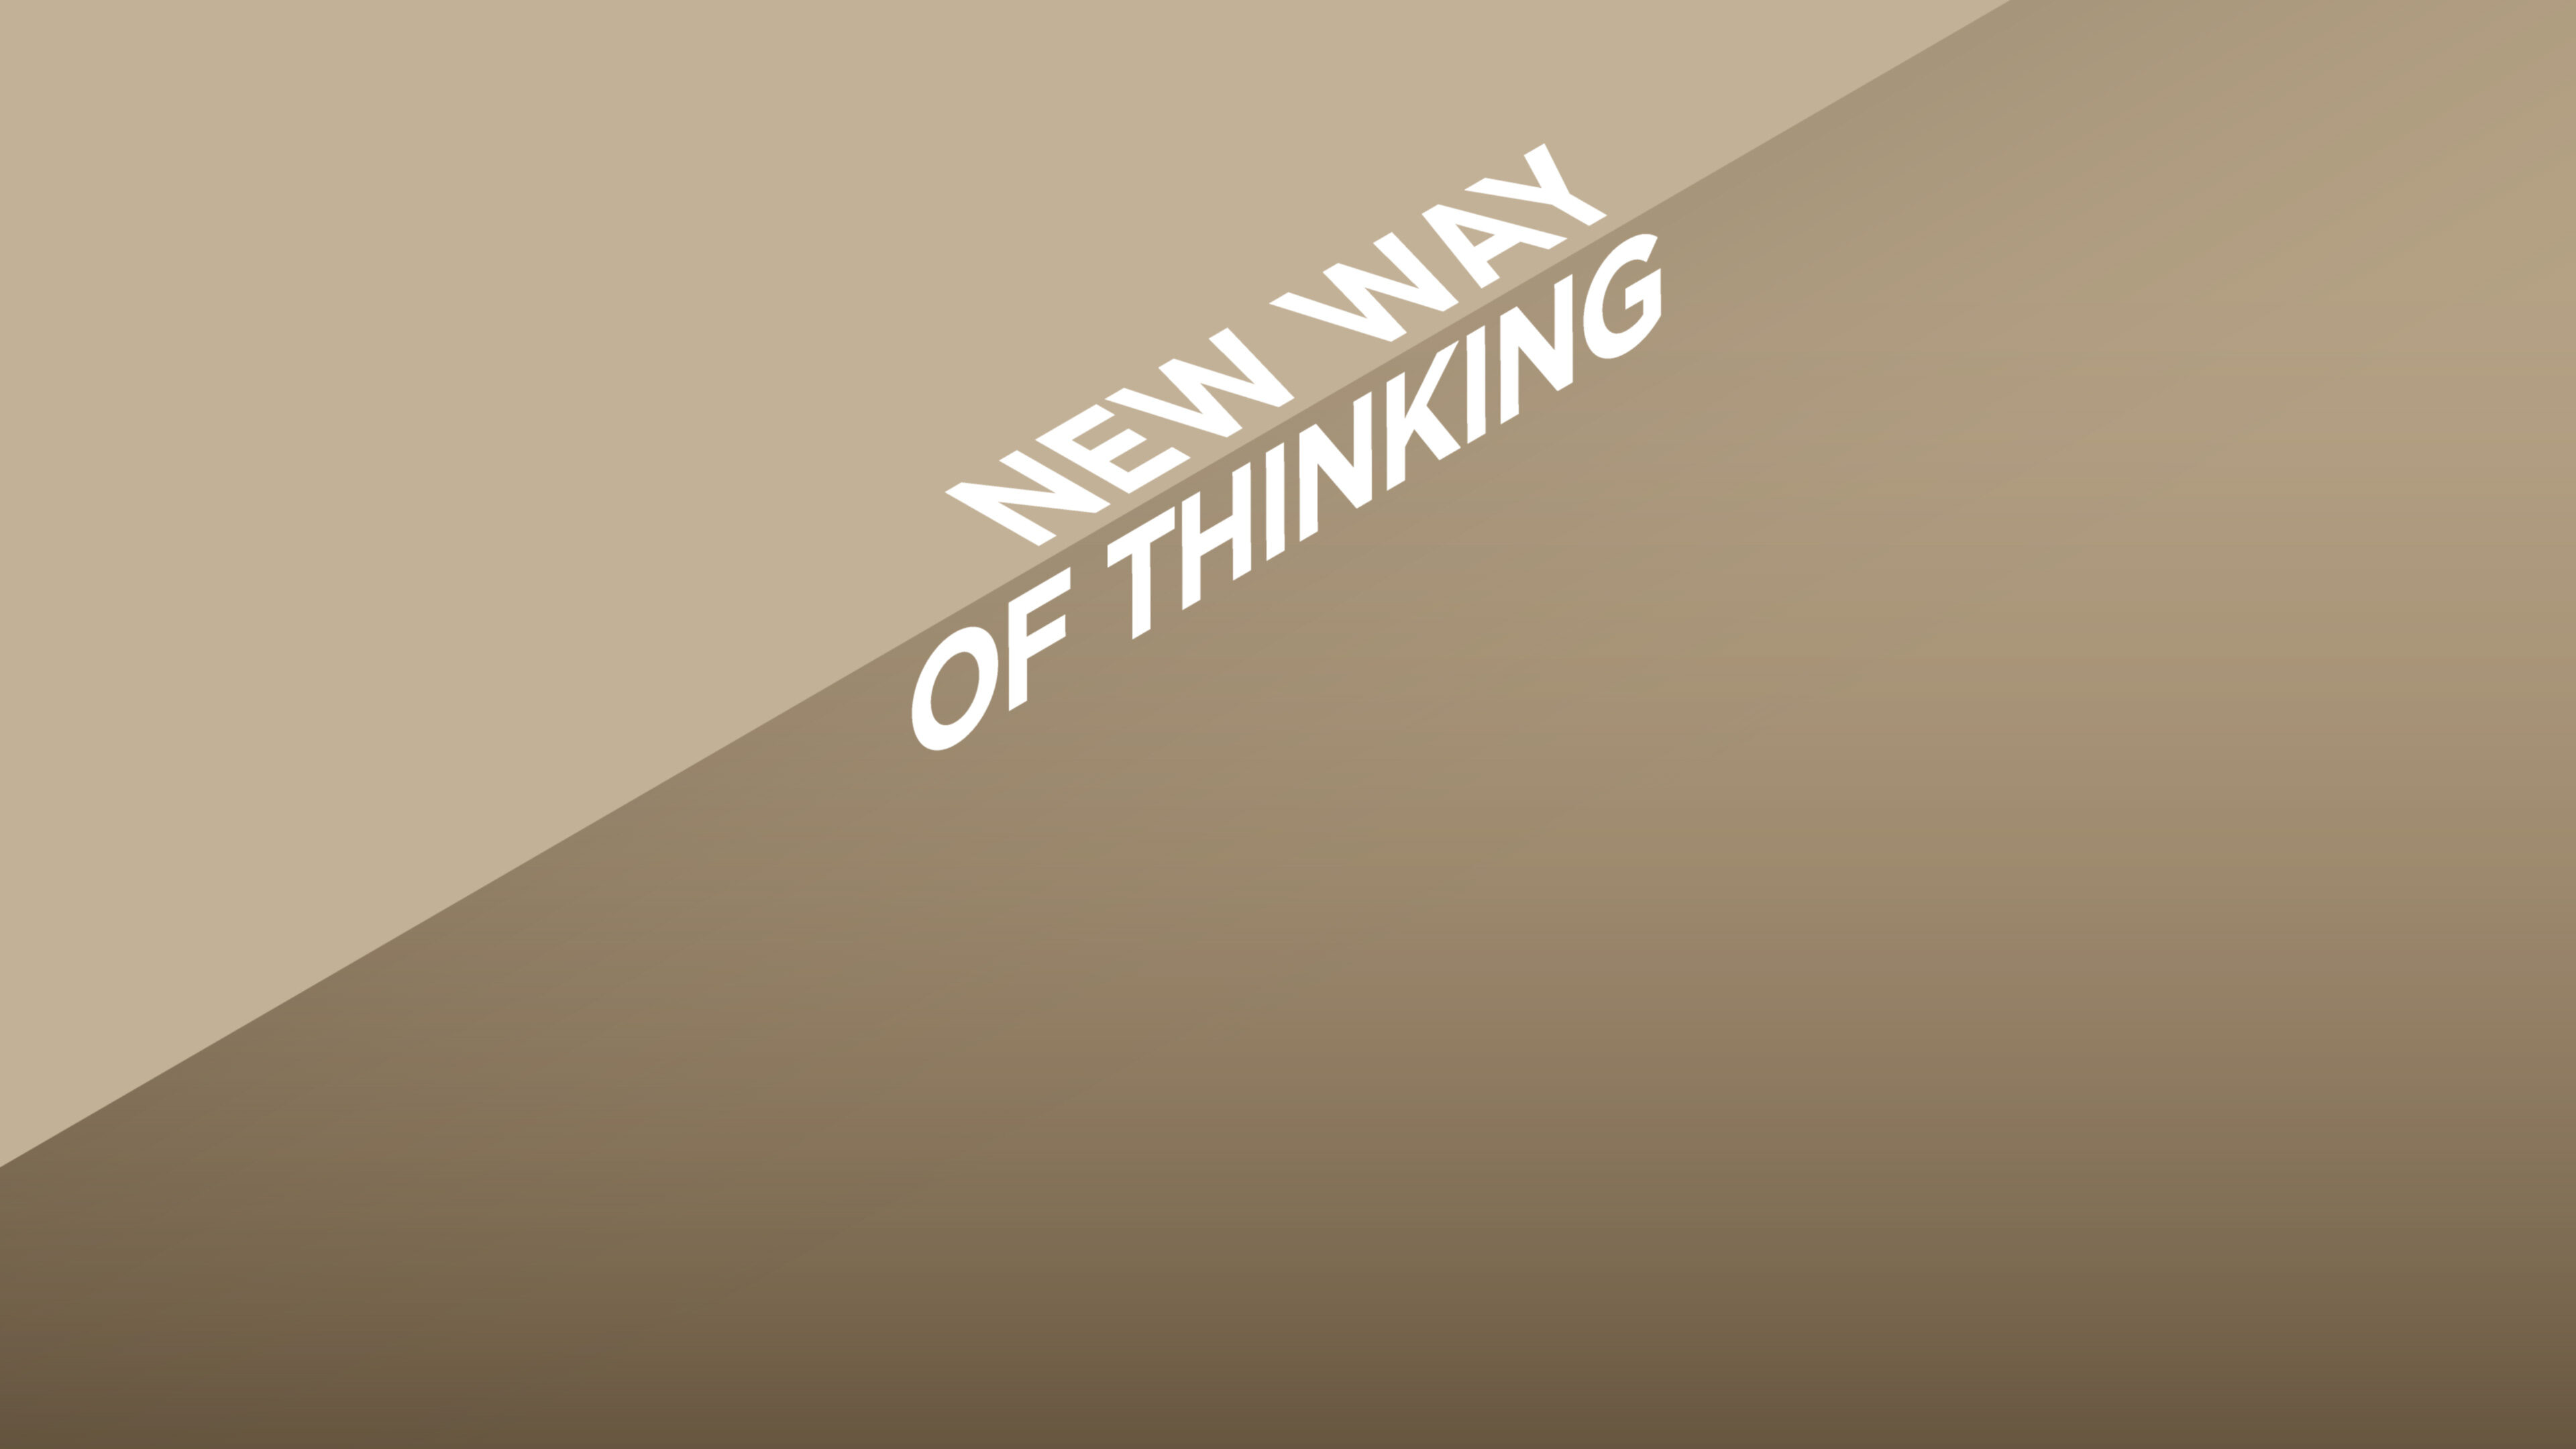 "New Way of Thinking" is uppercase, riding along a shadow edge and a full-bleed background.